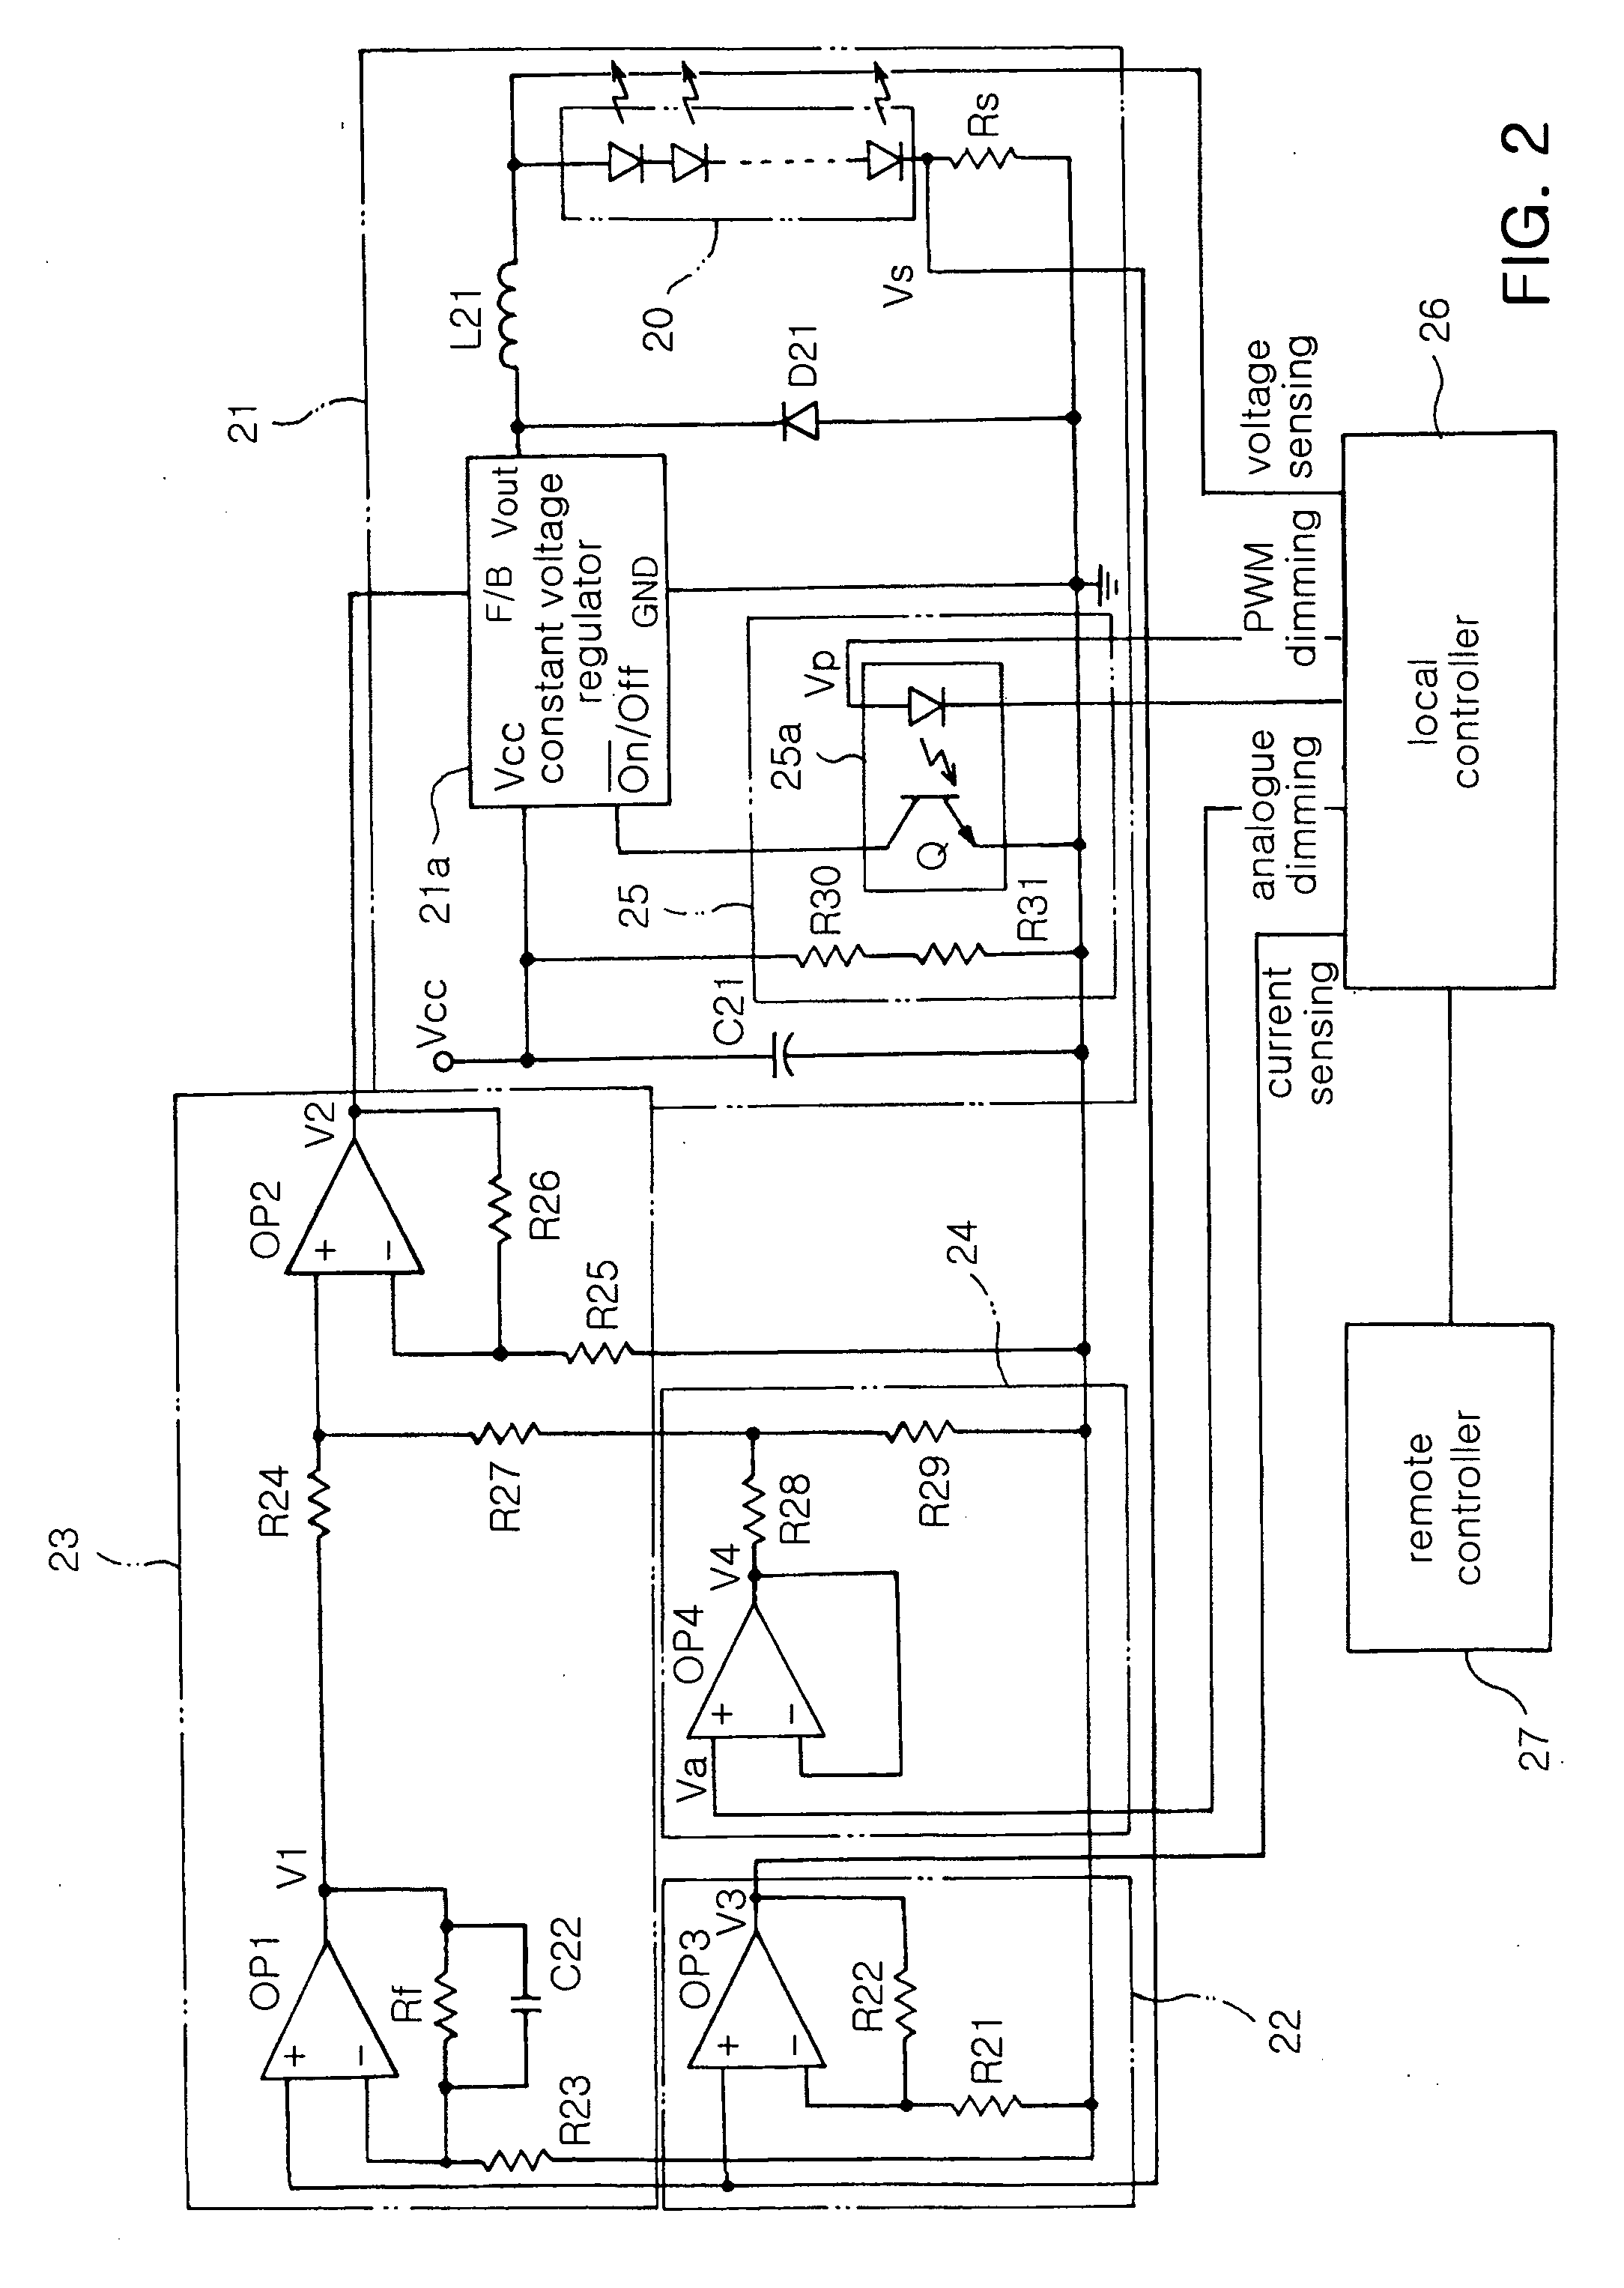 LED array driving apparatus and backlight driving apparatus using the same